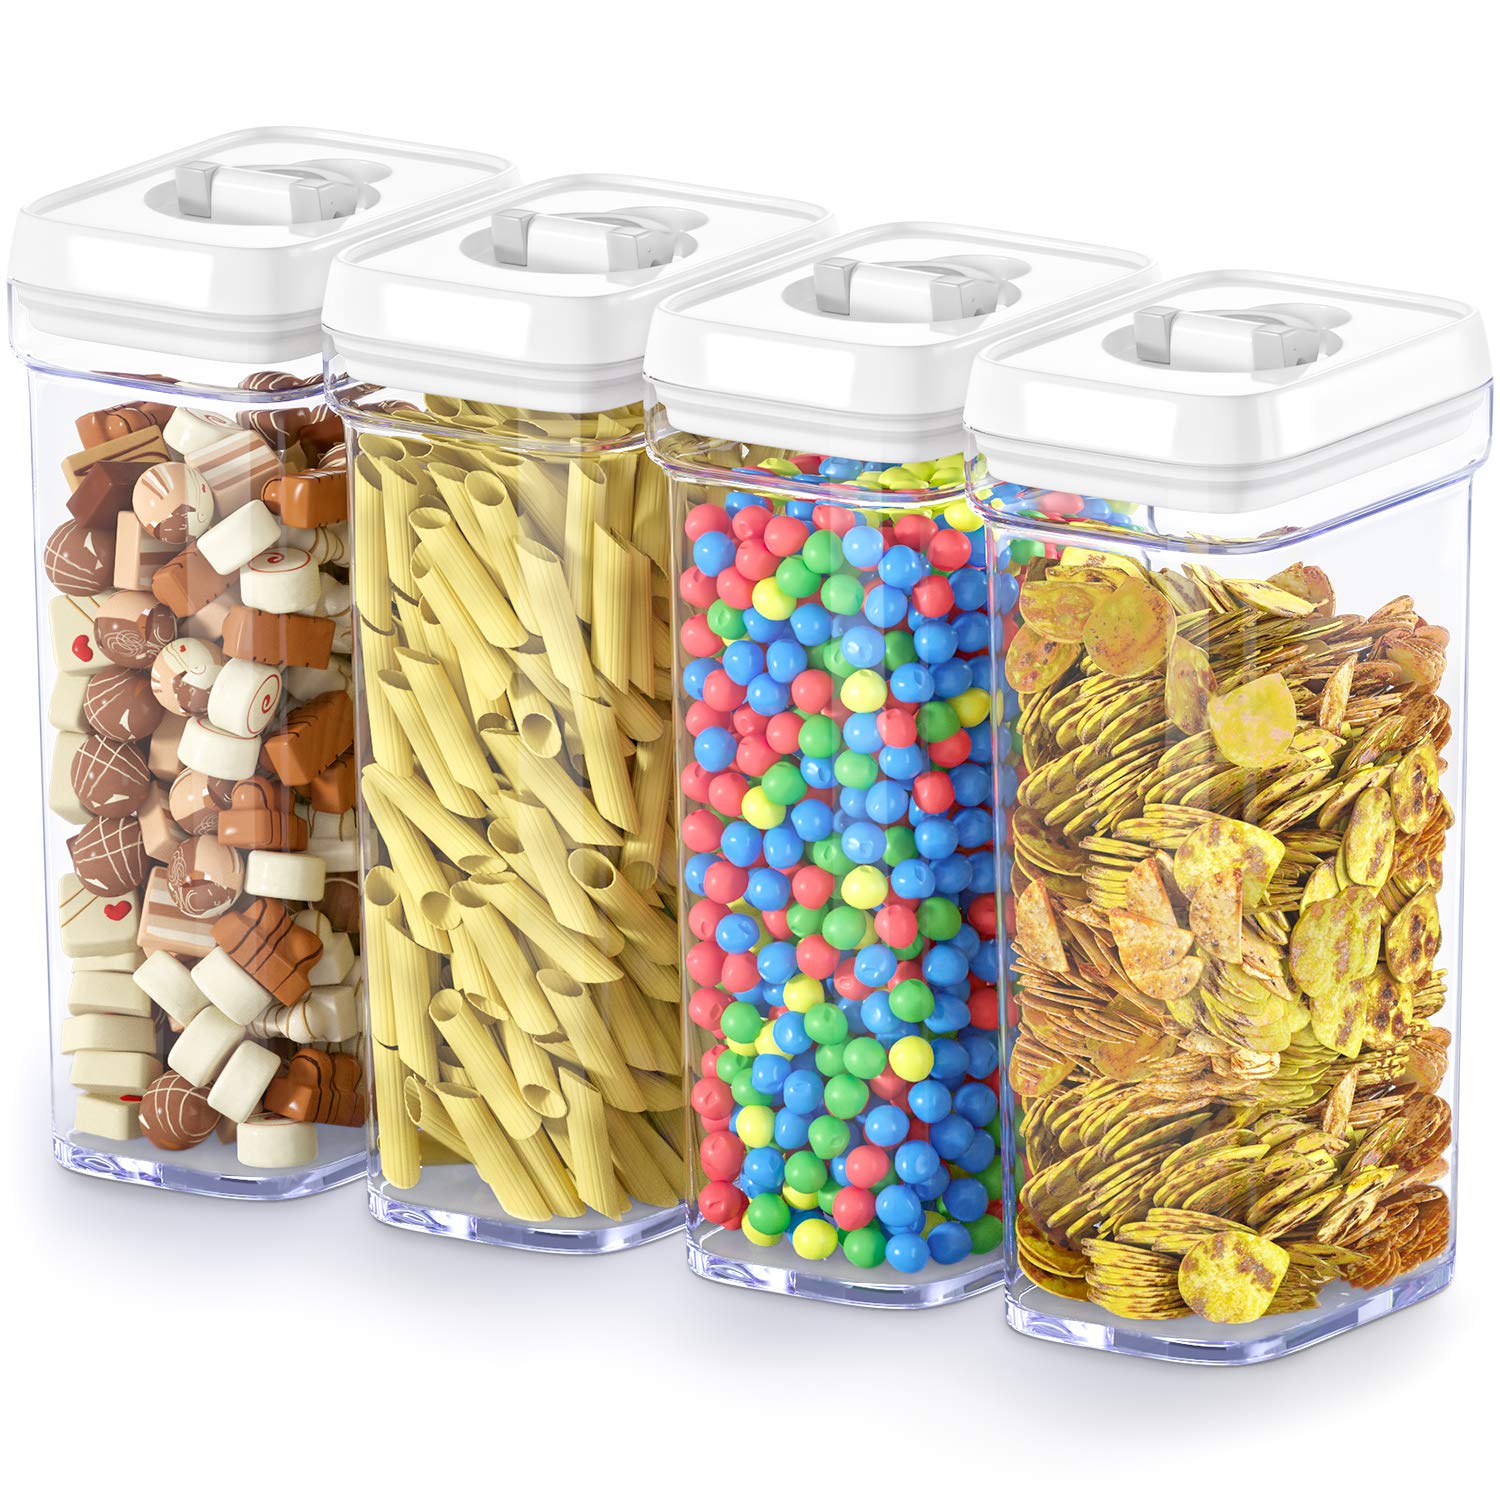 A variety of storage containers.